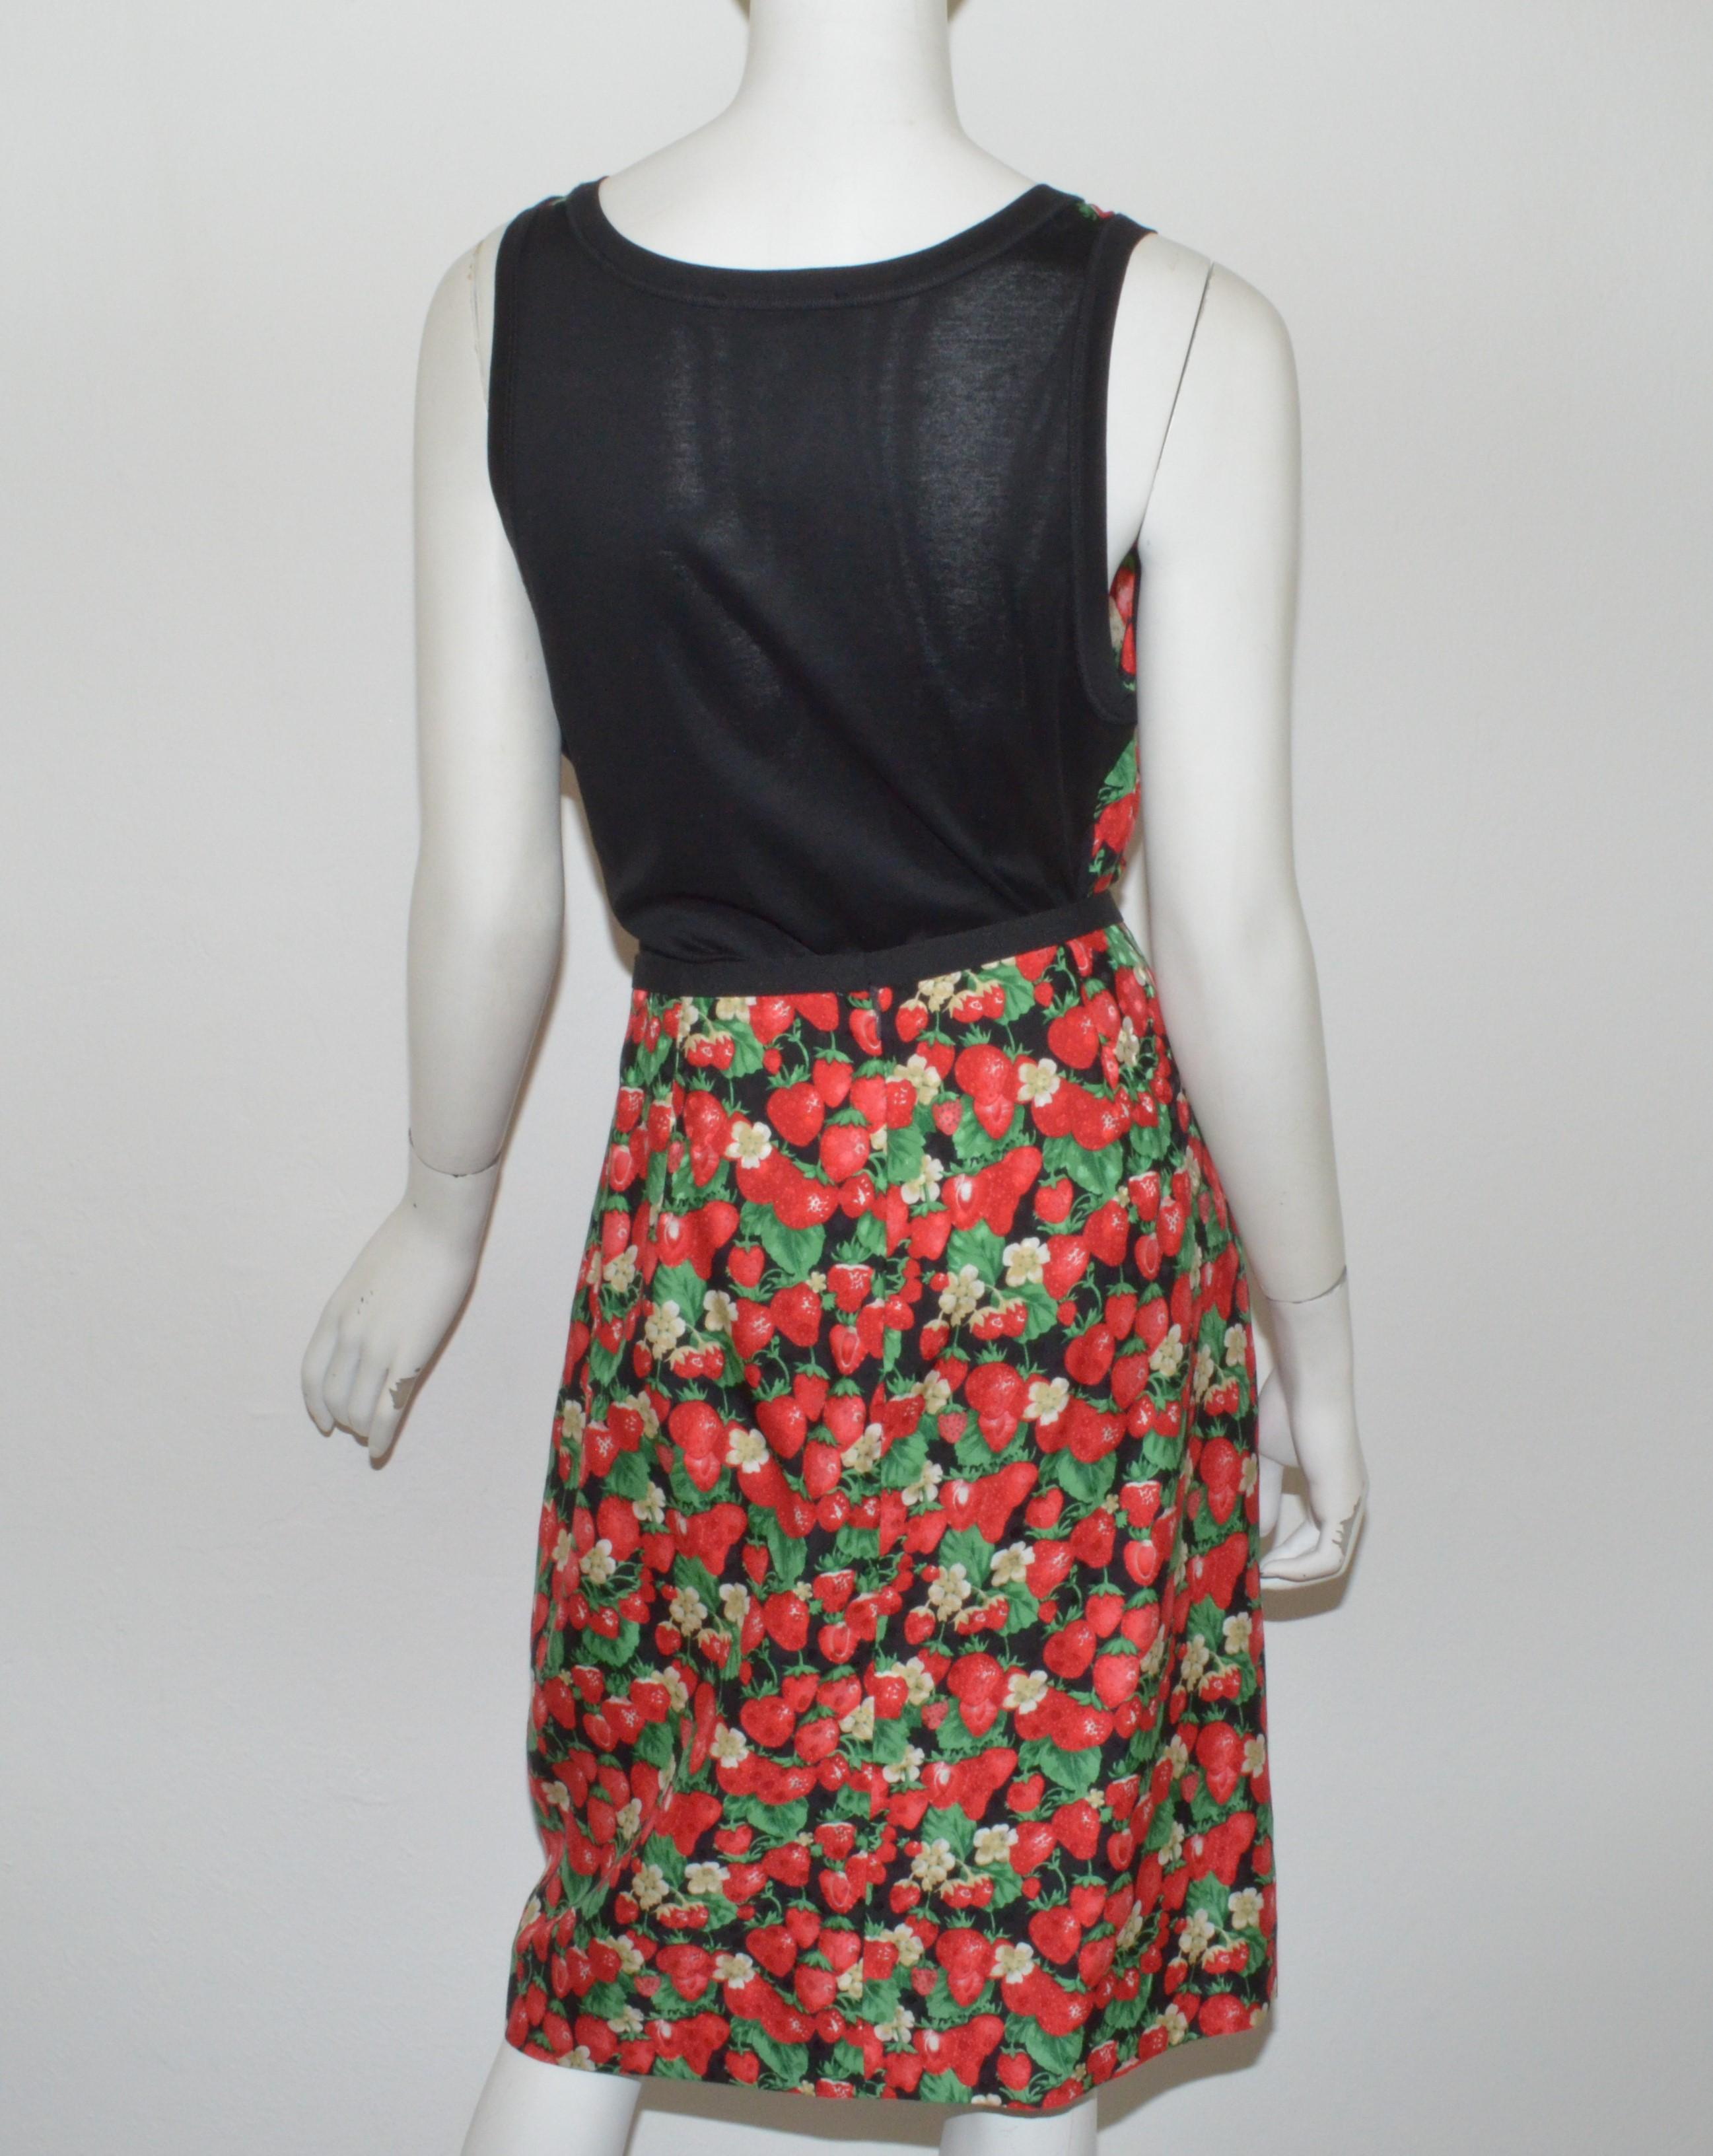 Dolce & Gabbana strawberry print skirt and top set — Top has a v-neckline with functional buttons, size 48. Skirt has a back zipper closure and a faille ribbon trim around the waistline, size 46, 100% silk, made in Italy.

Measurements:
Top - bust